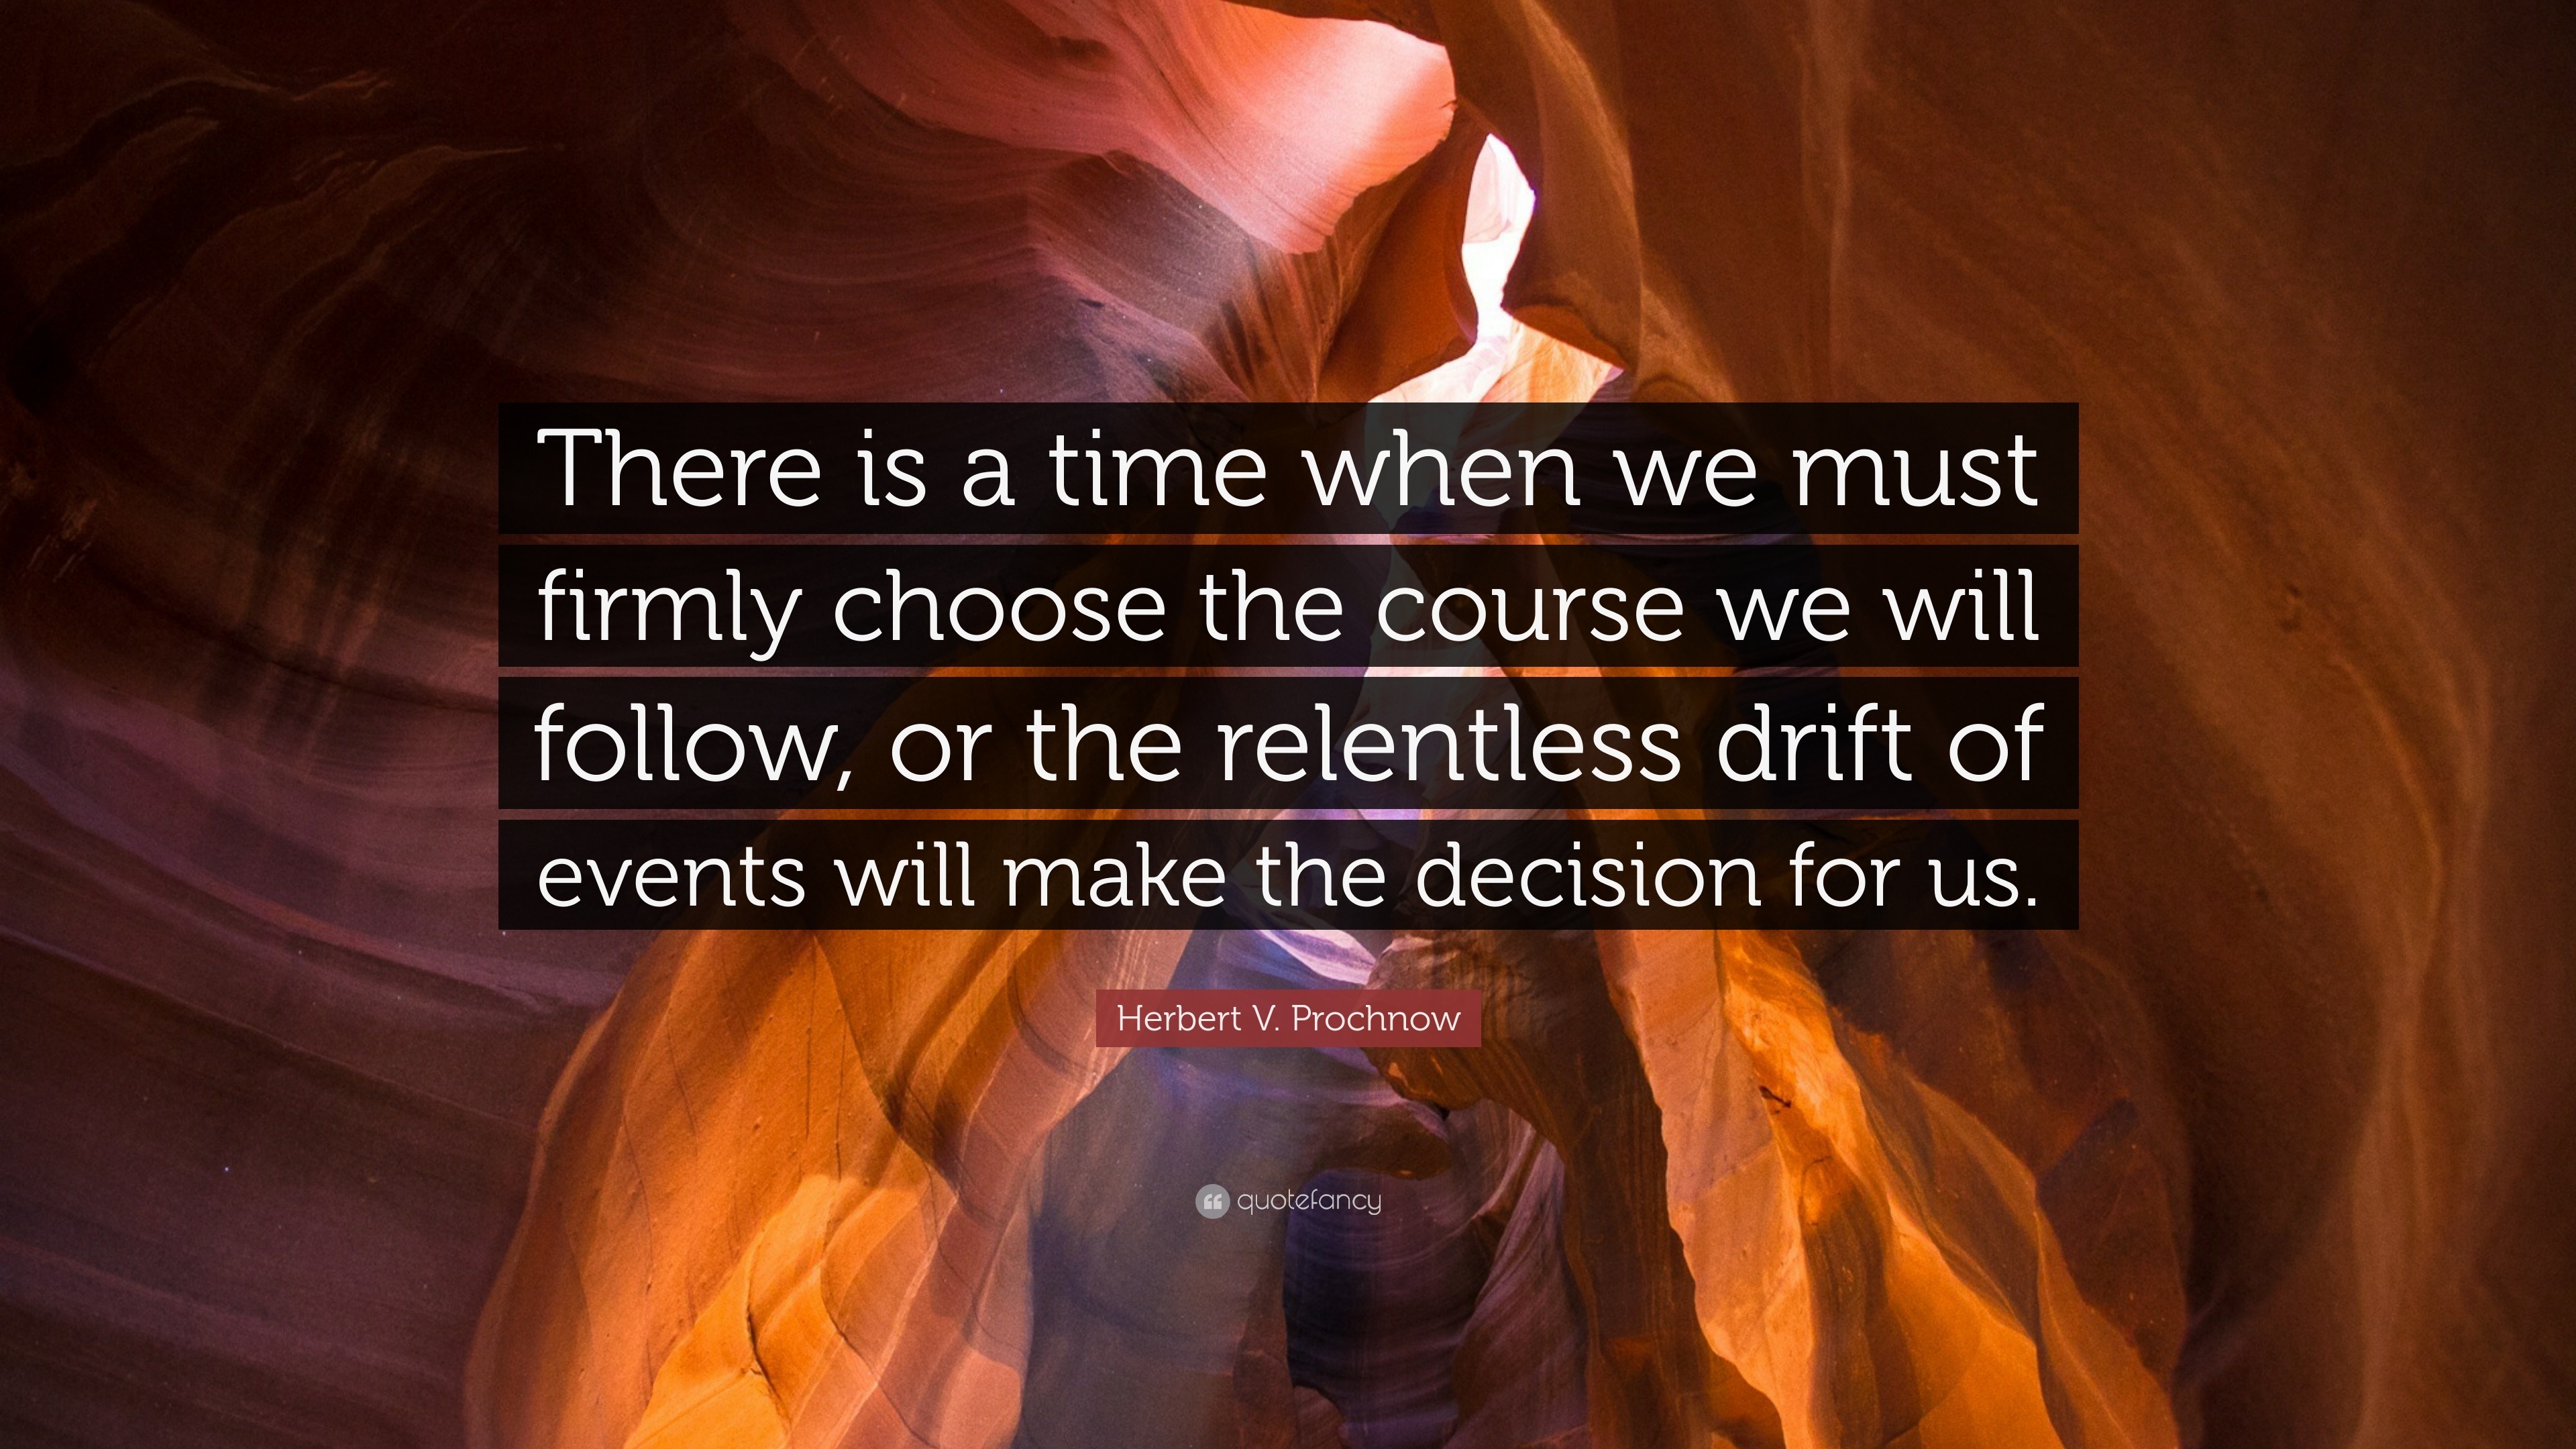 Herbert V. Prochnow Quote: “There is a time when we must firmly choose ...